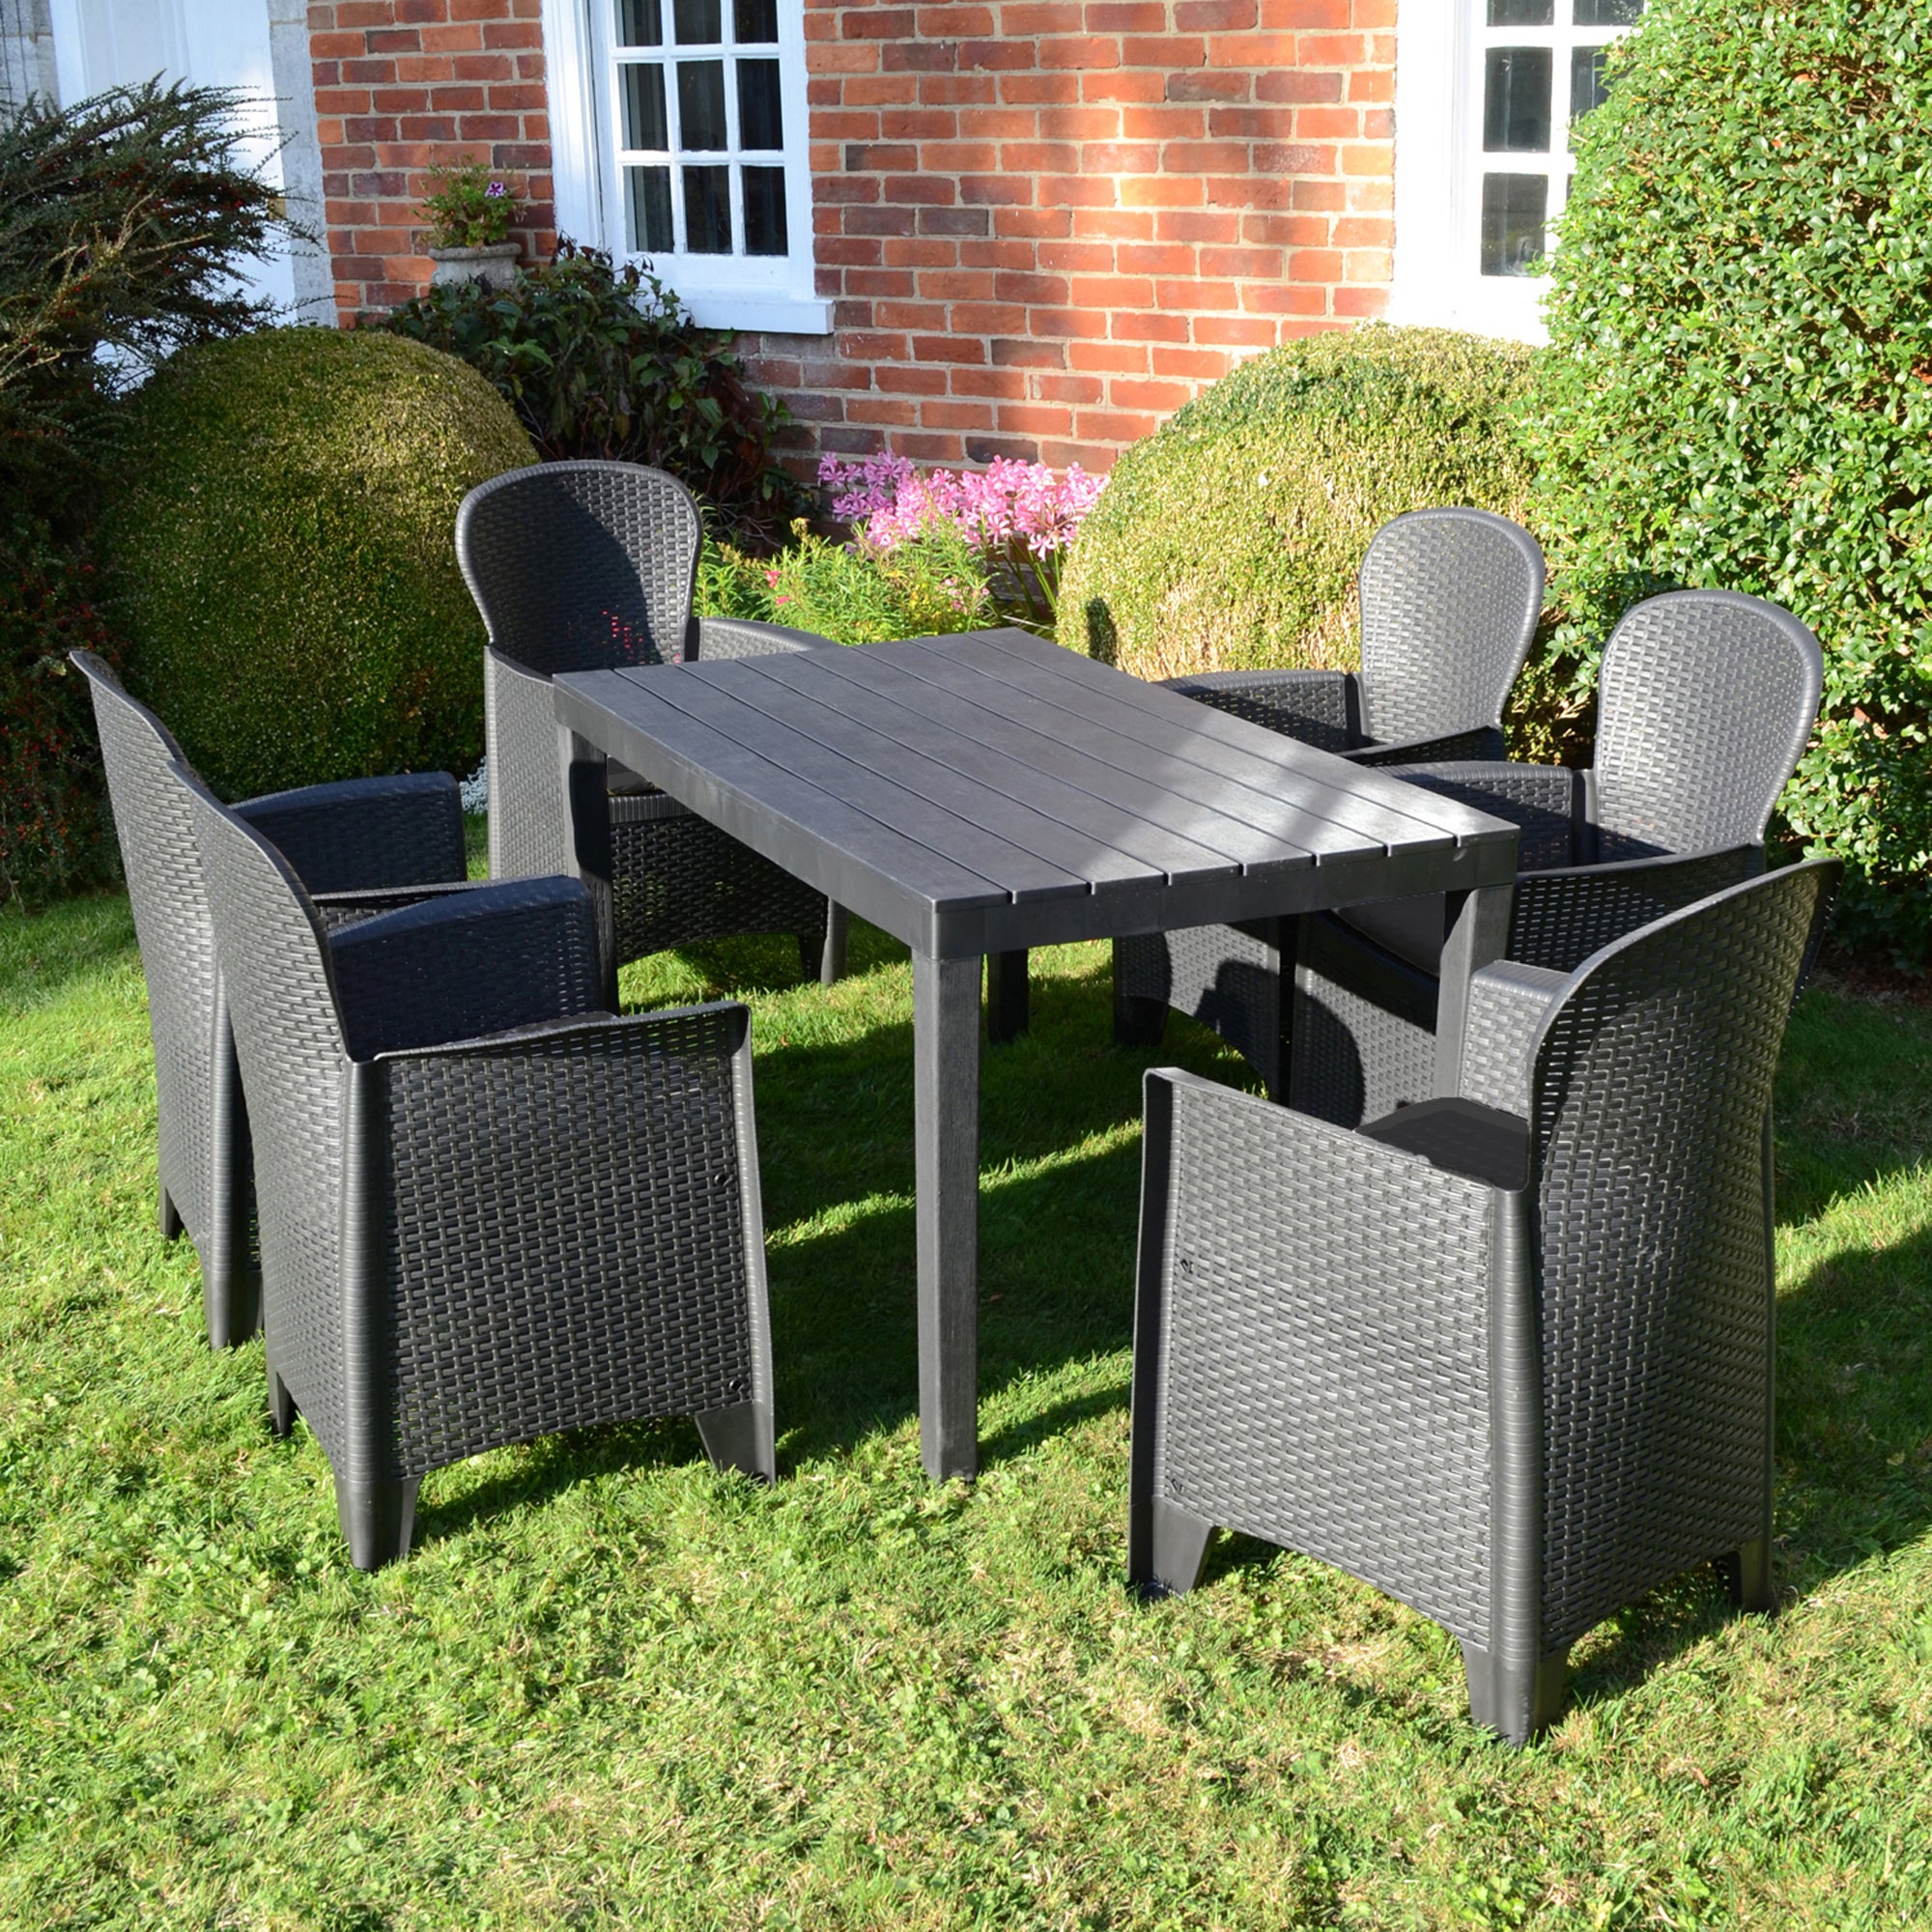 Trabella Roma 6 Seater Dining Set with Sicily Chairs